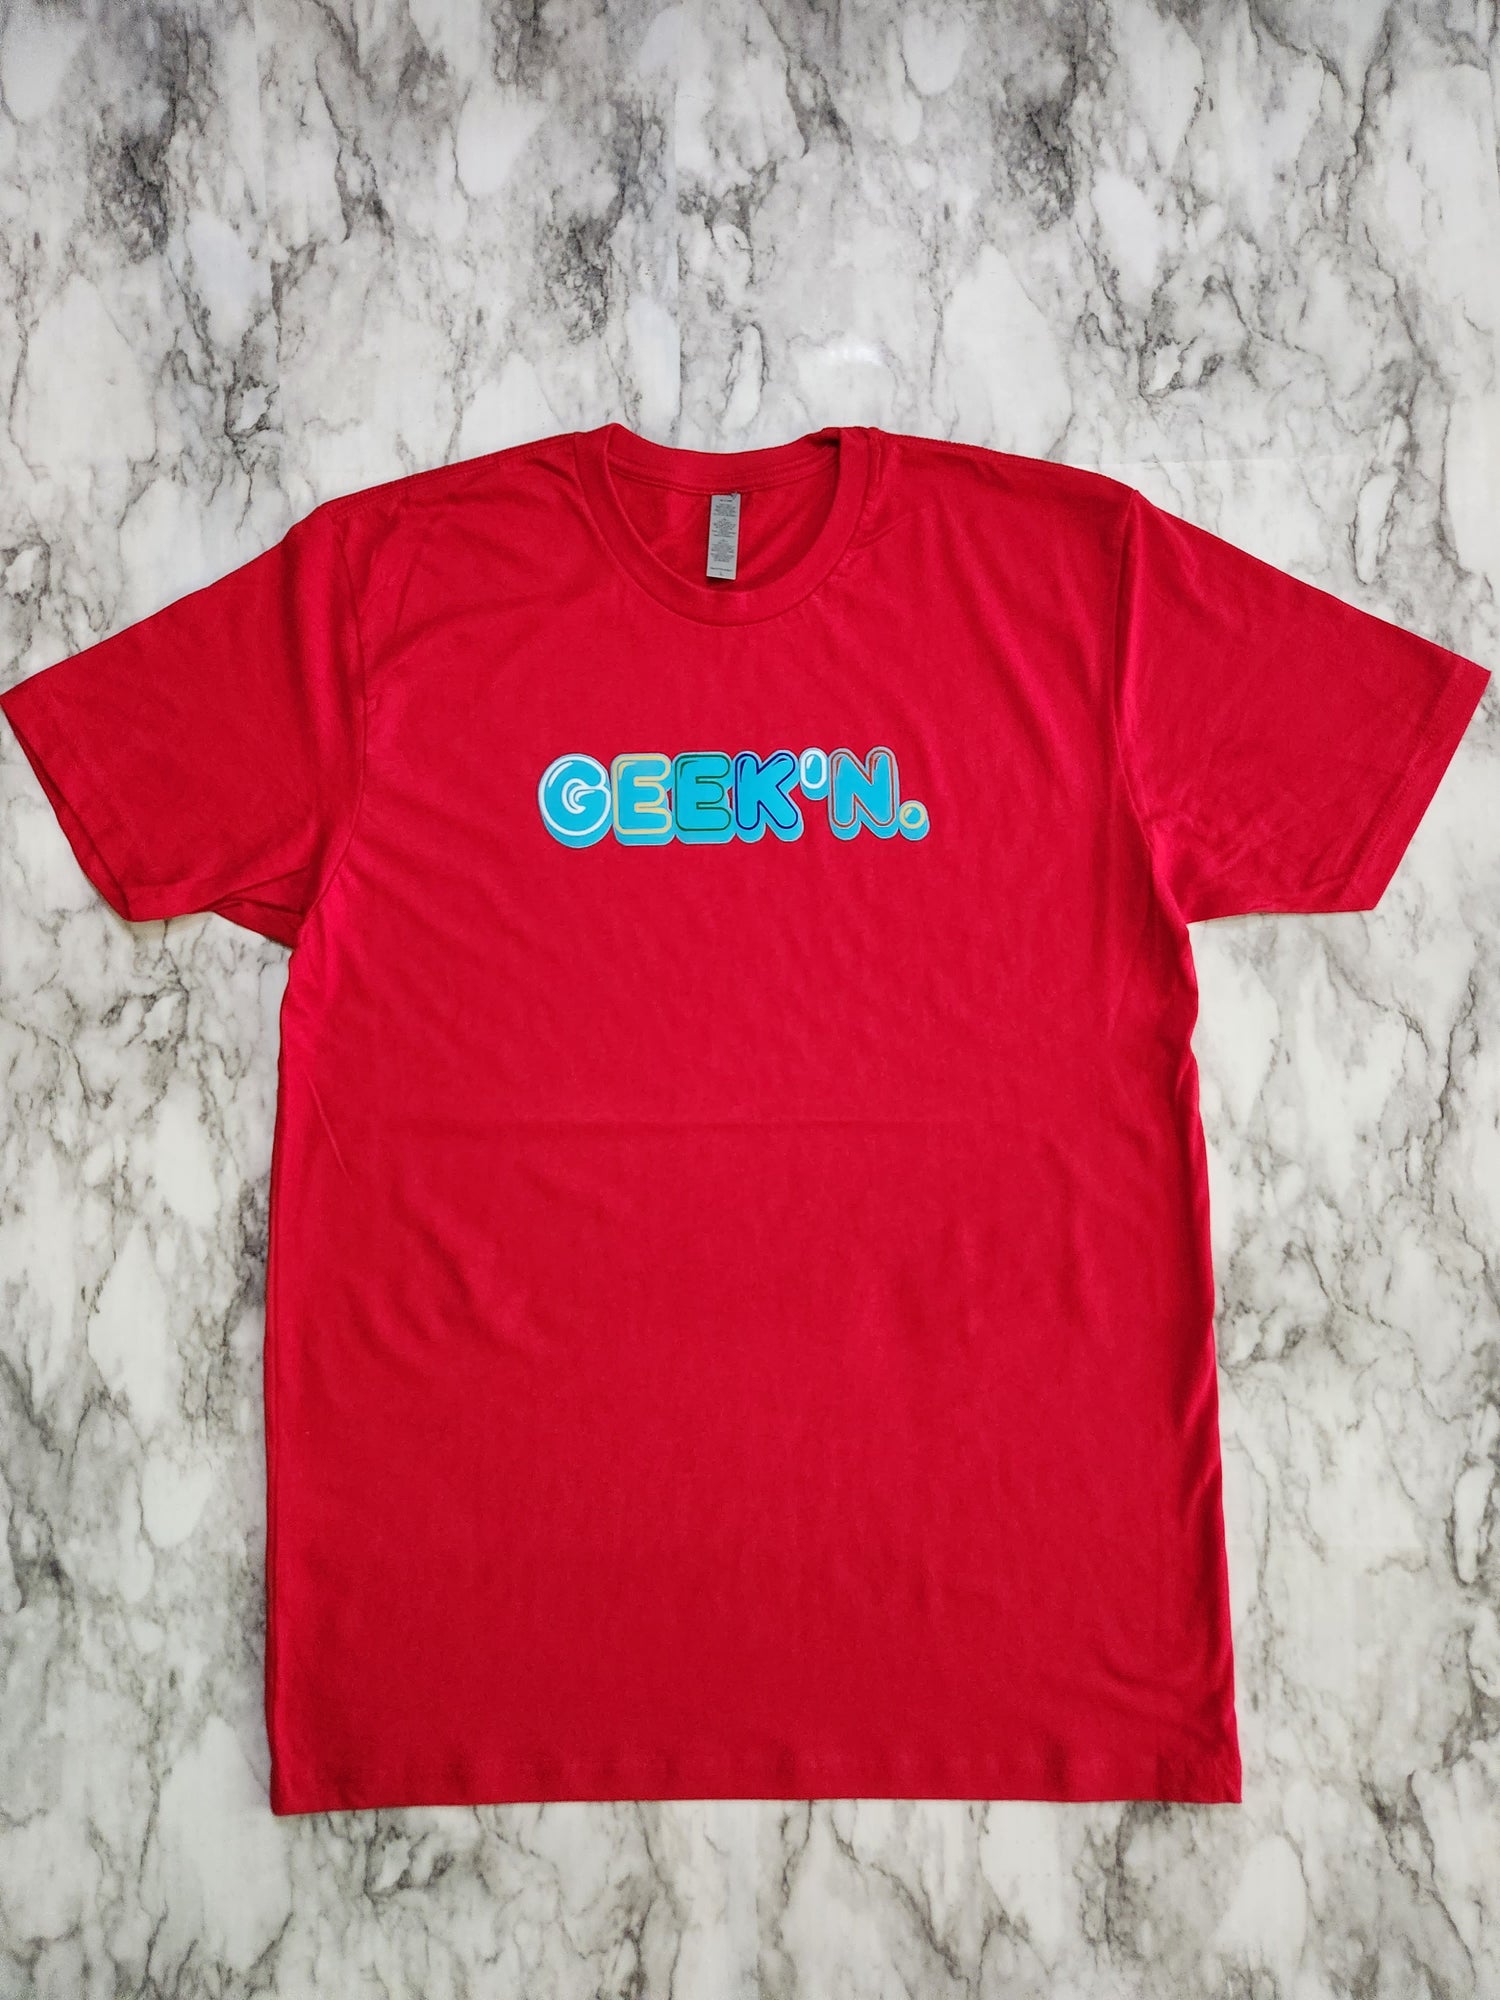 GEEK'N. T-Shirt (Red) - Centre Ave Clothing Co.